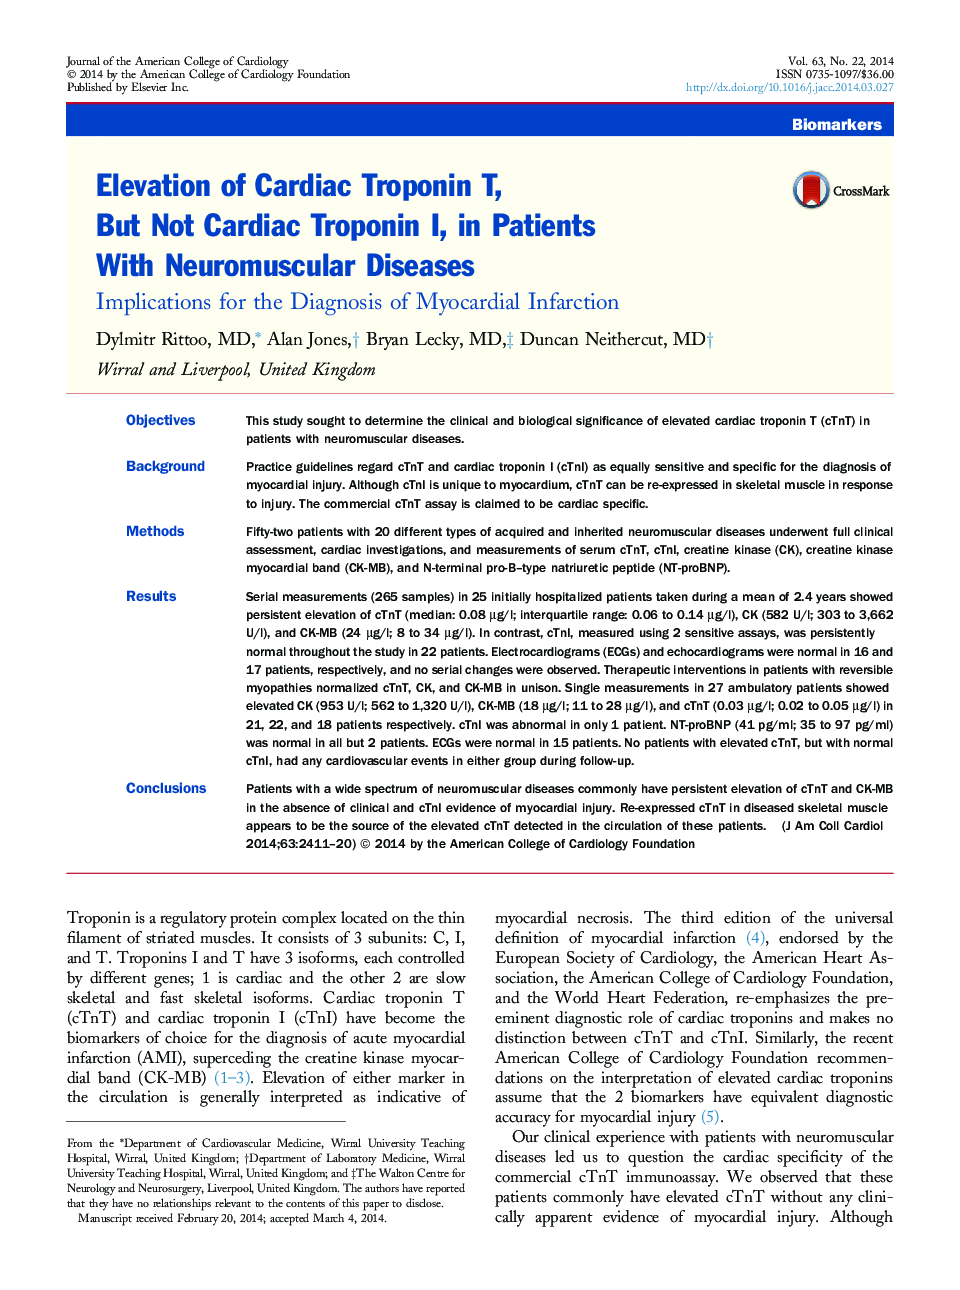 Elevation of Cardiac Troponin T, But Not Cardiac Troponin I, in Patients With Neuromuscular Diseases : Implications for the Diagnosis of Myocardial Infarction